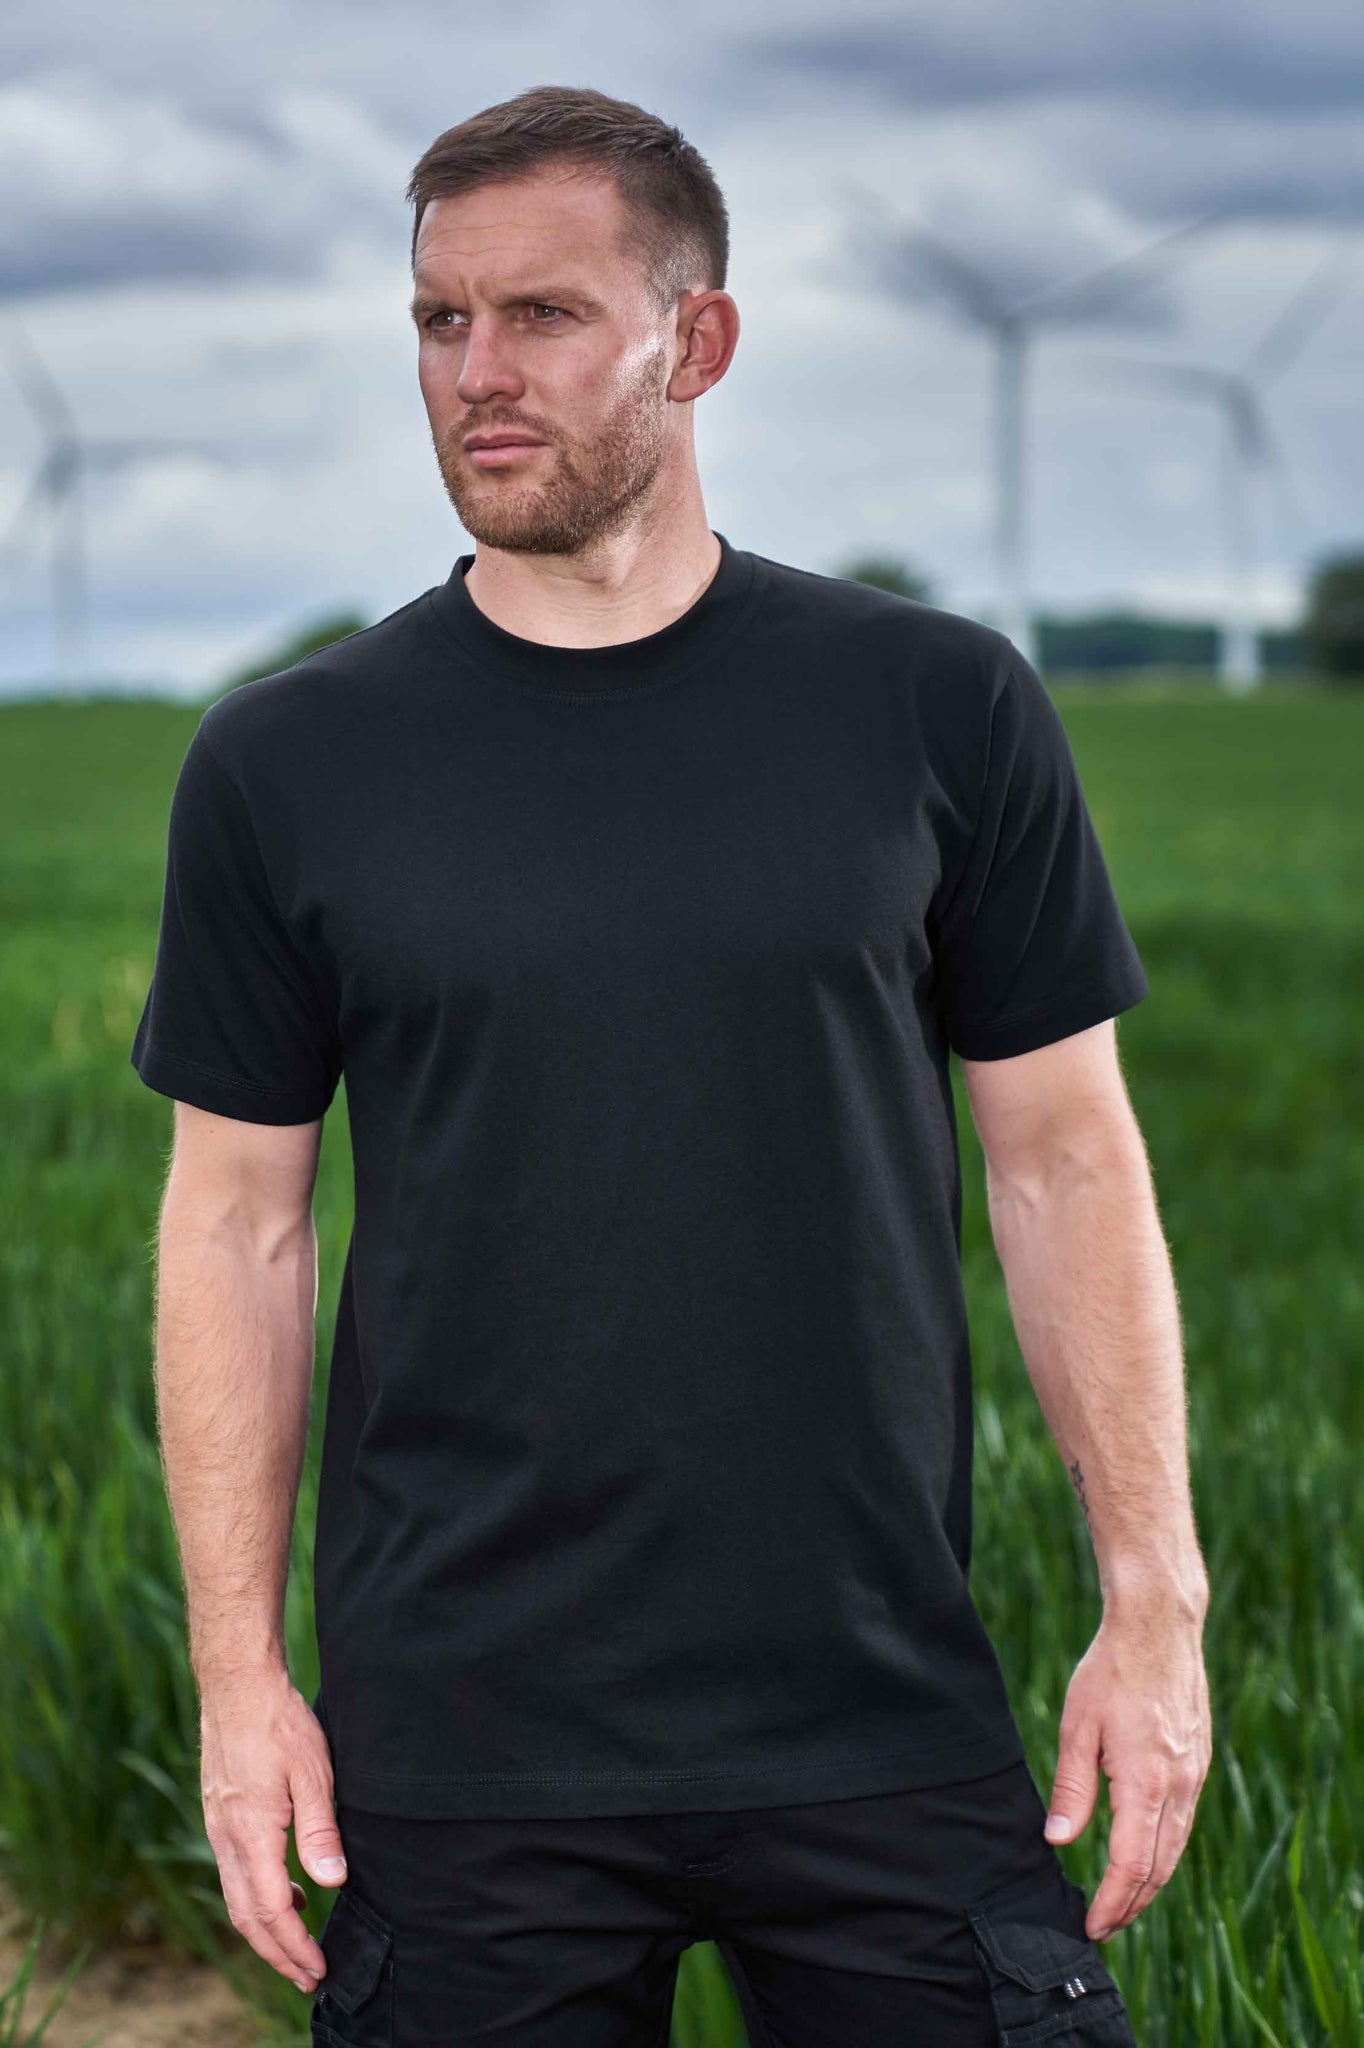 Waxbill T-Shirt EarthPro® / 65% GRS recyceltes Polyester - 35% Baumwolle /  XS-5XL / 3 Farben